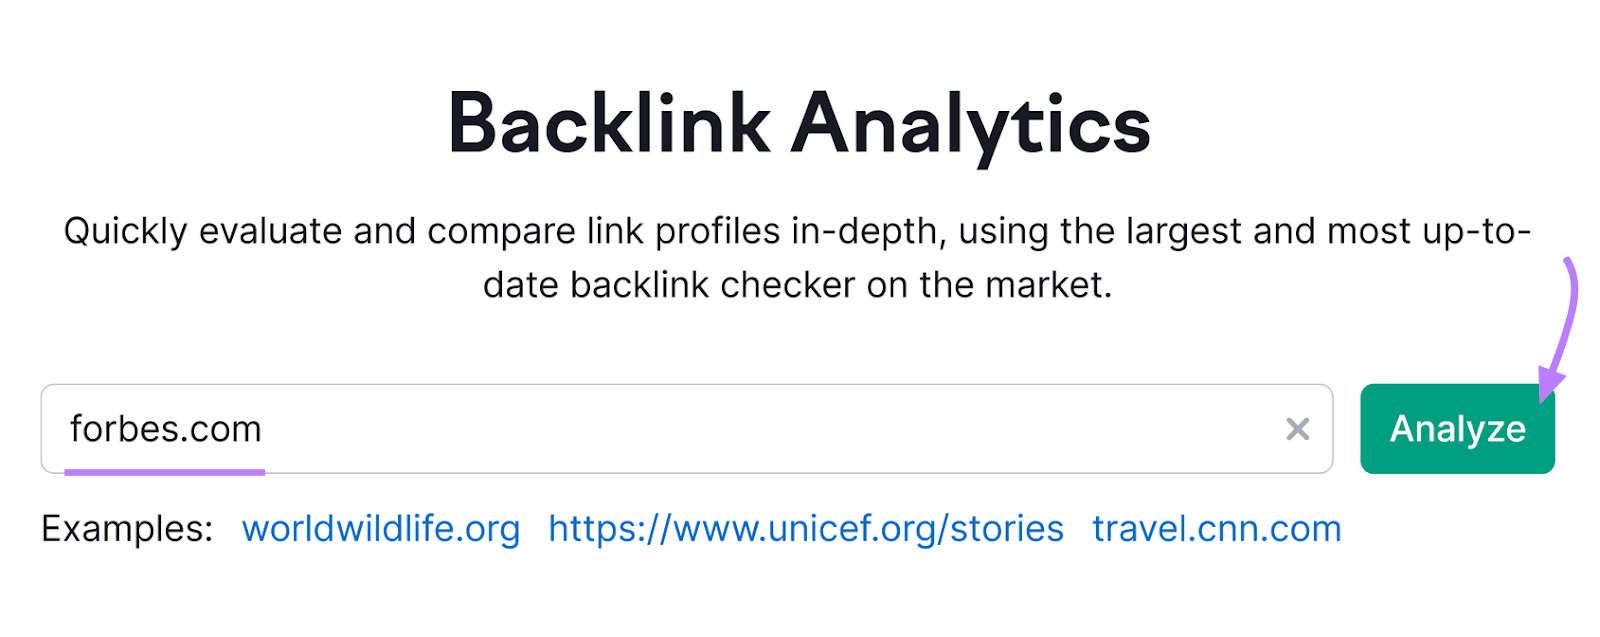 Backlink Analytics tool with “forbes.com” entered in the domain bar.